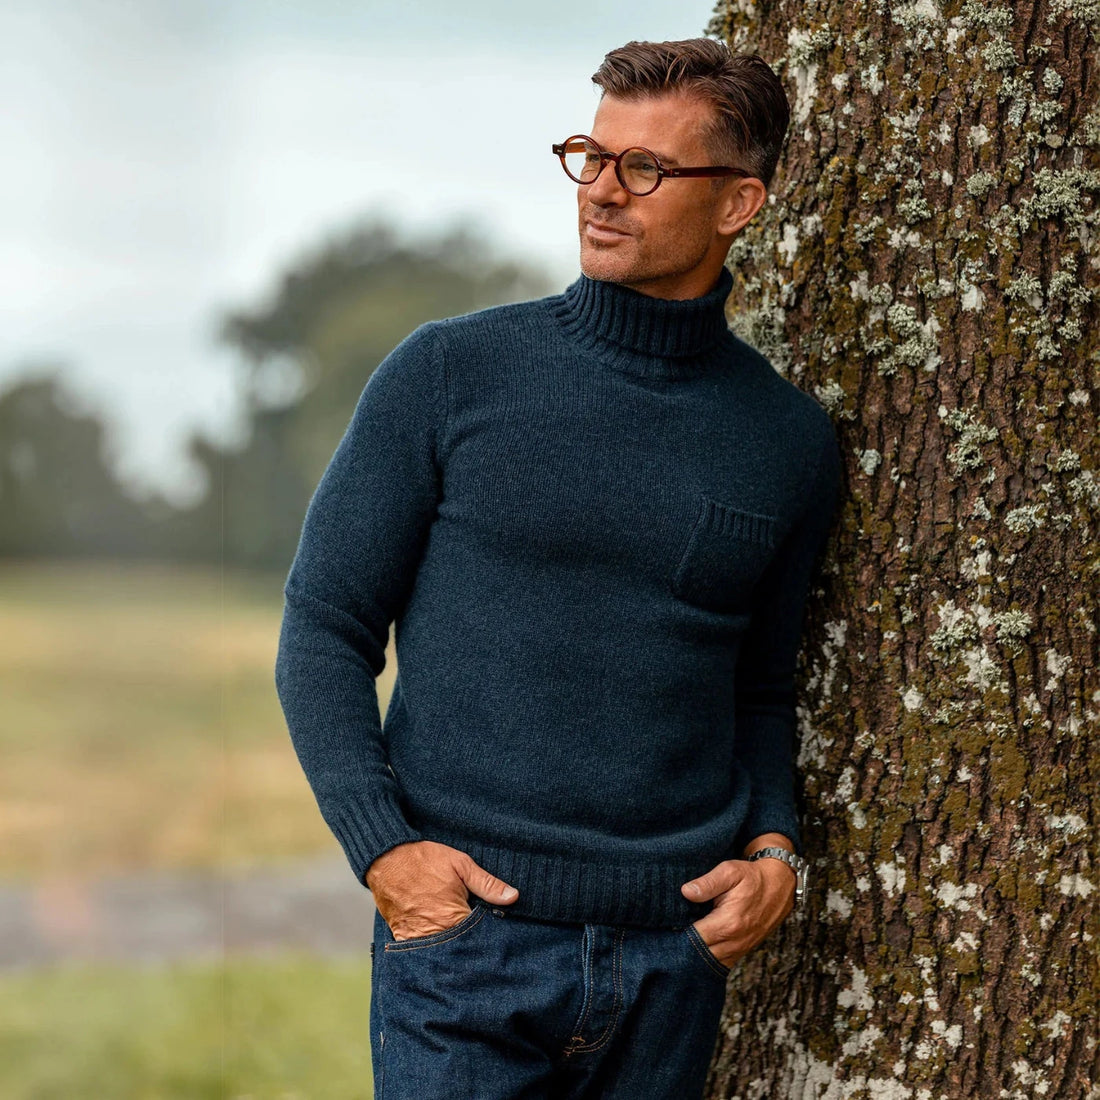 Man in glasses leaning against a tree outdoors.